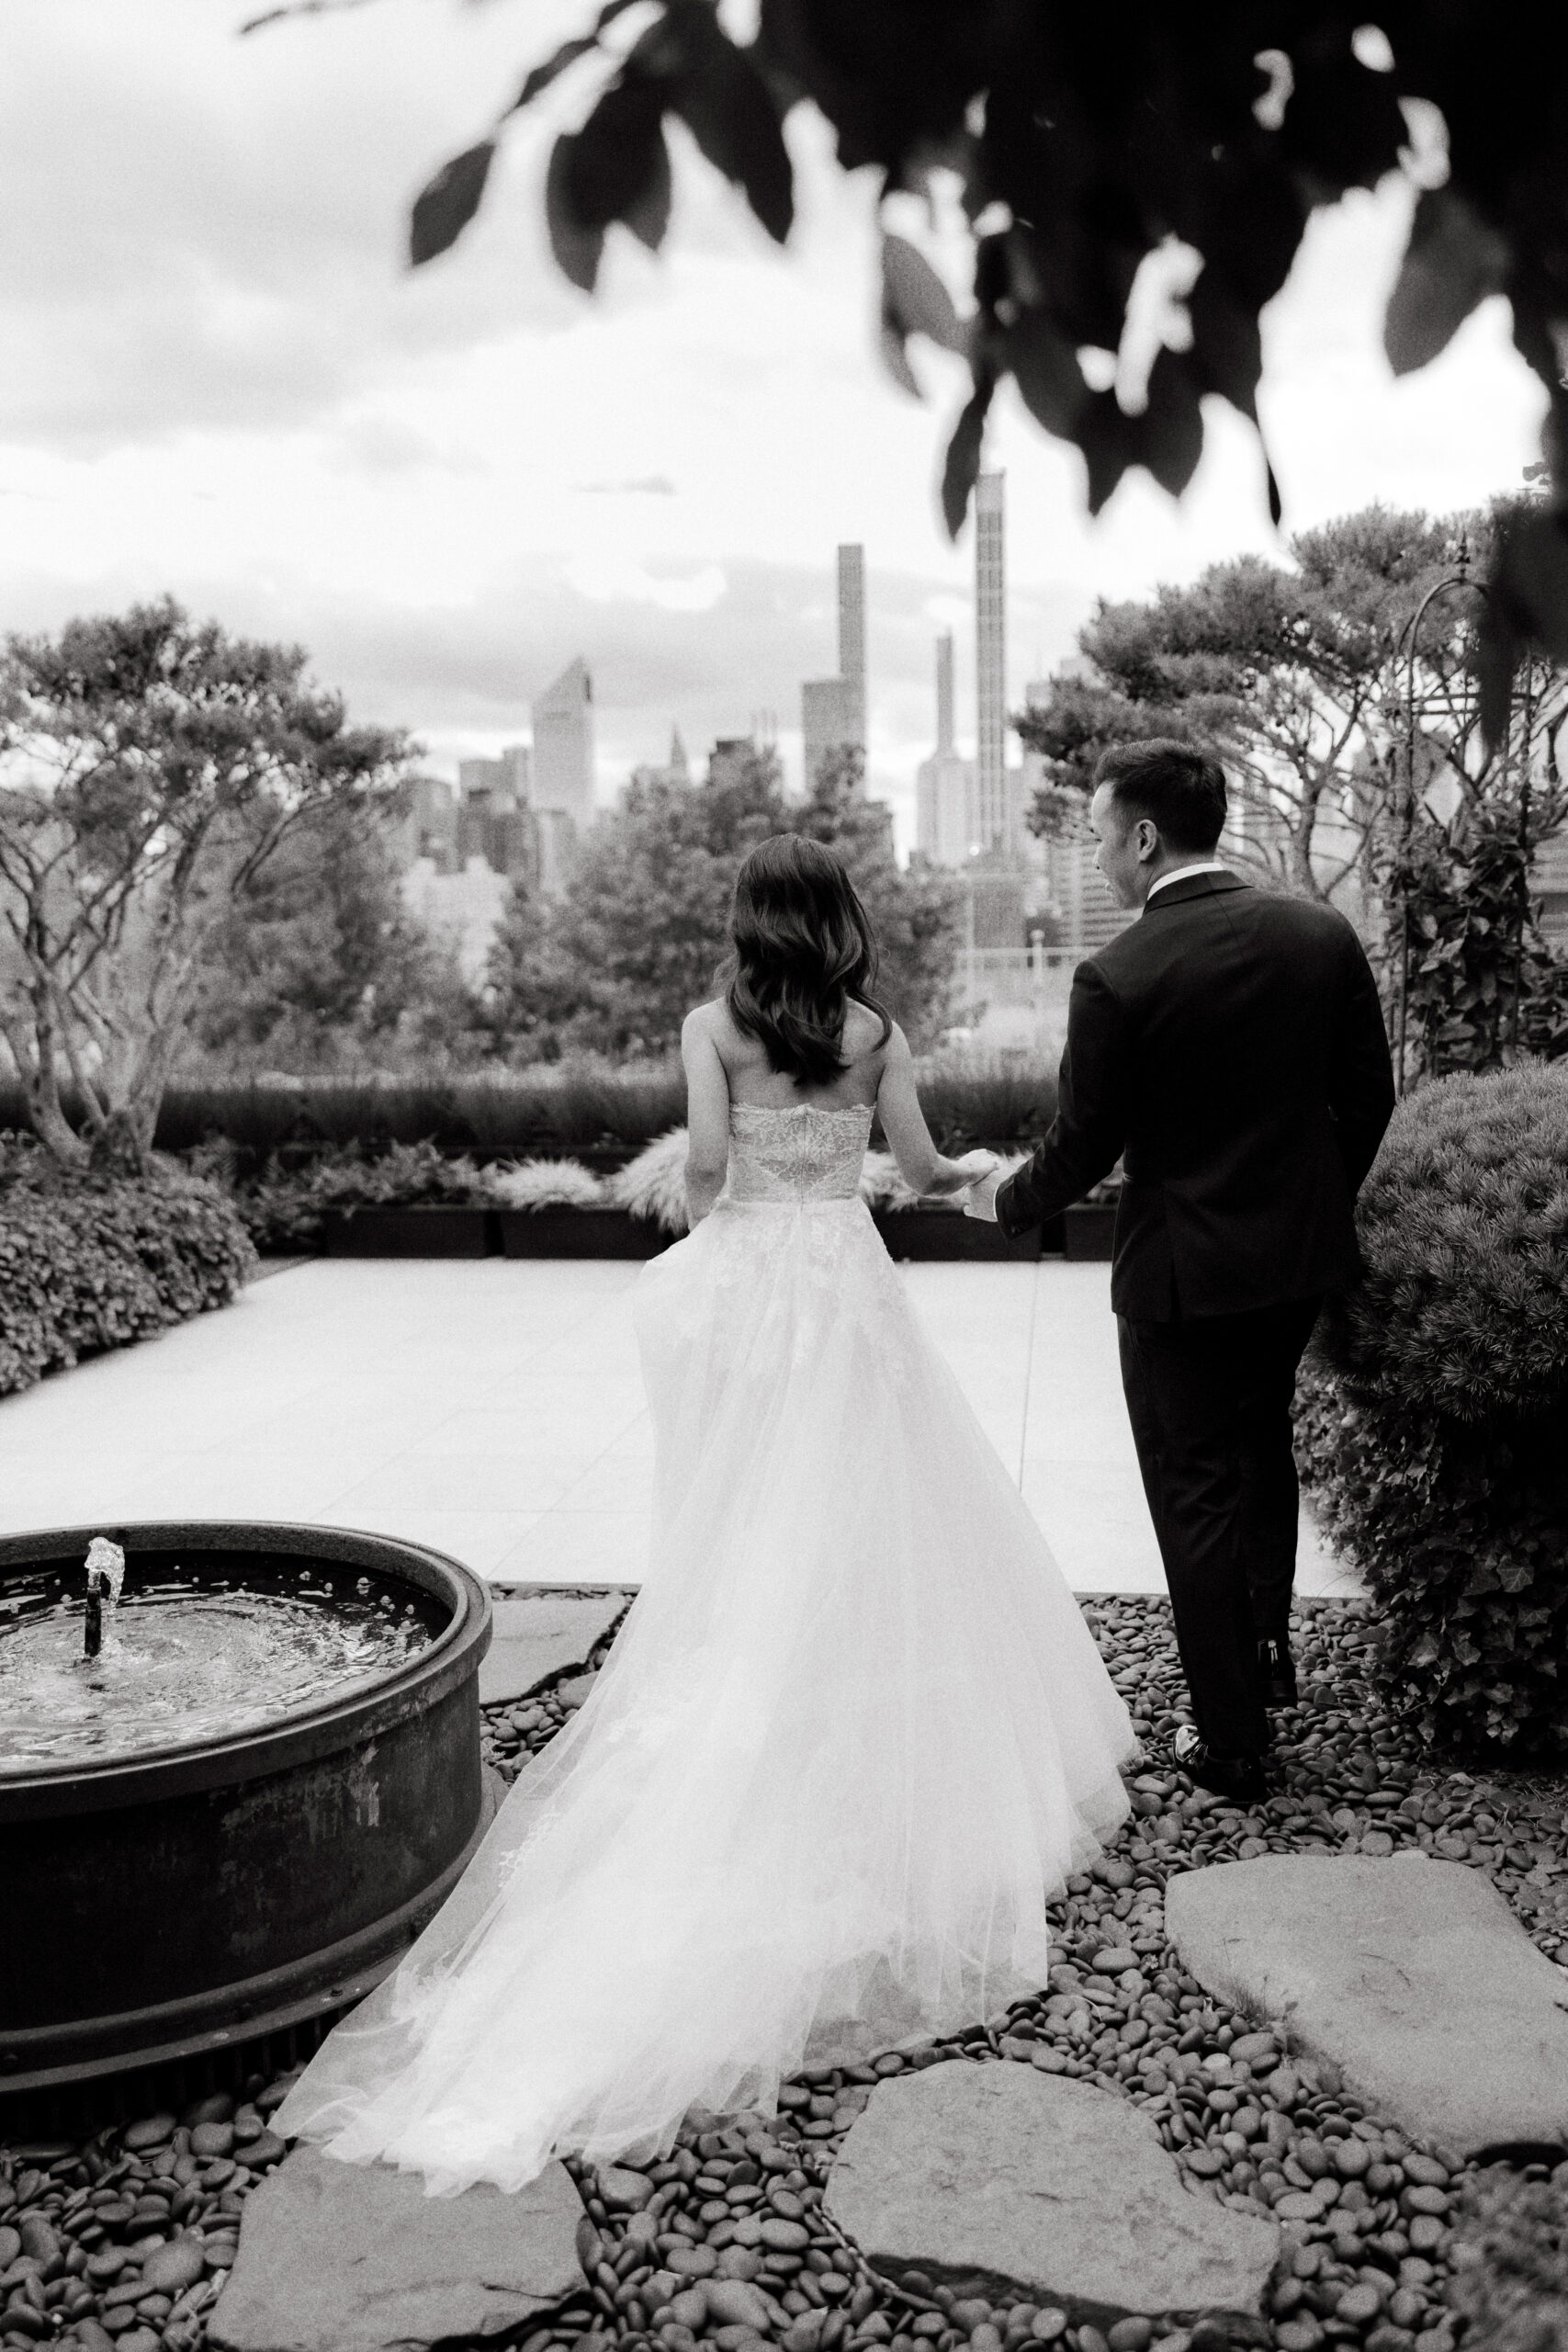 Black and white photo of the bride and groom walking outside. High-quality wedding photography image by Jenny Fu Studio.